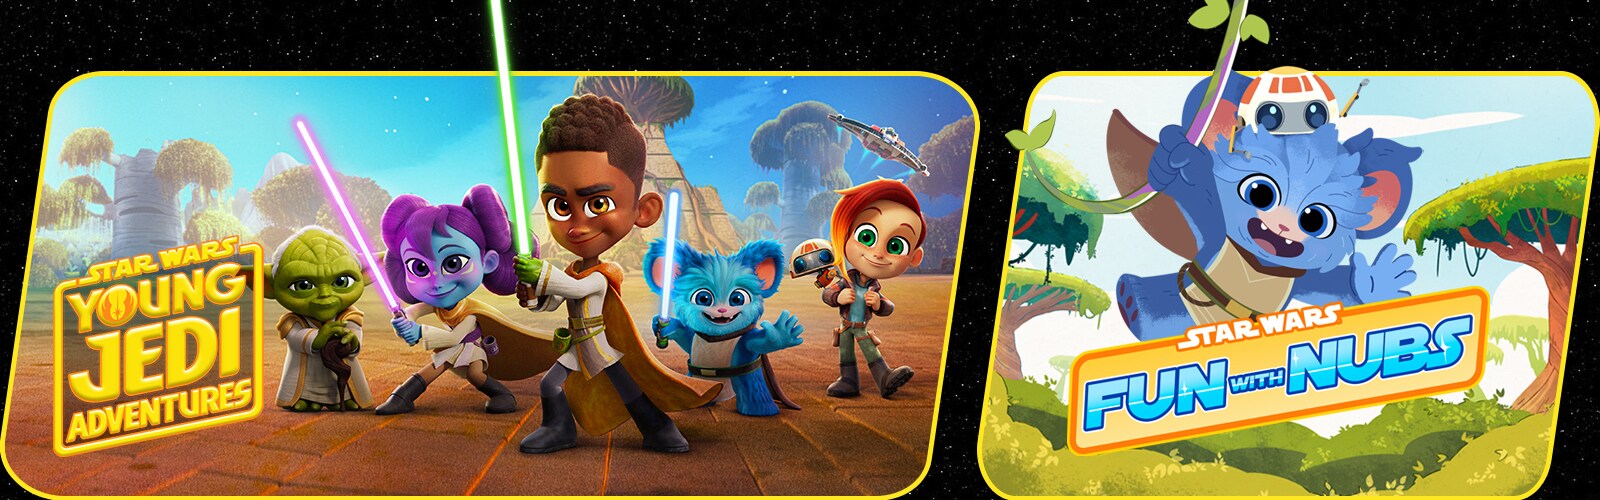 Young Jedi Adventures and Fun with Nubs key art and logos